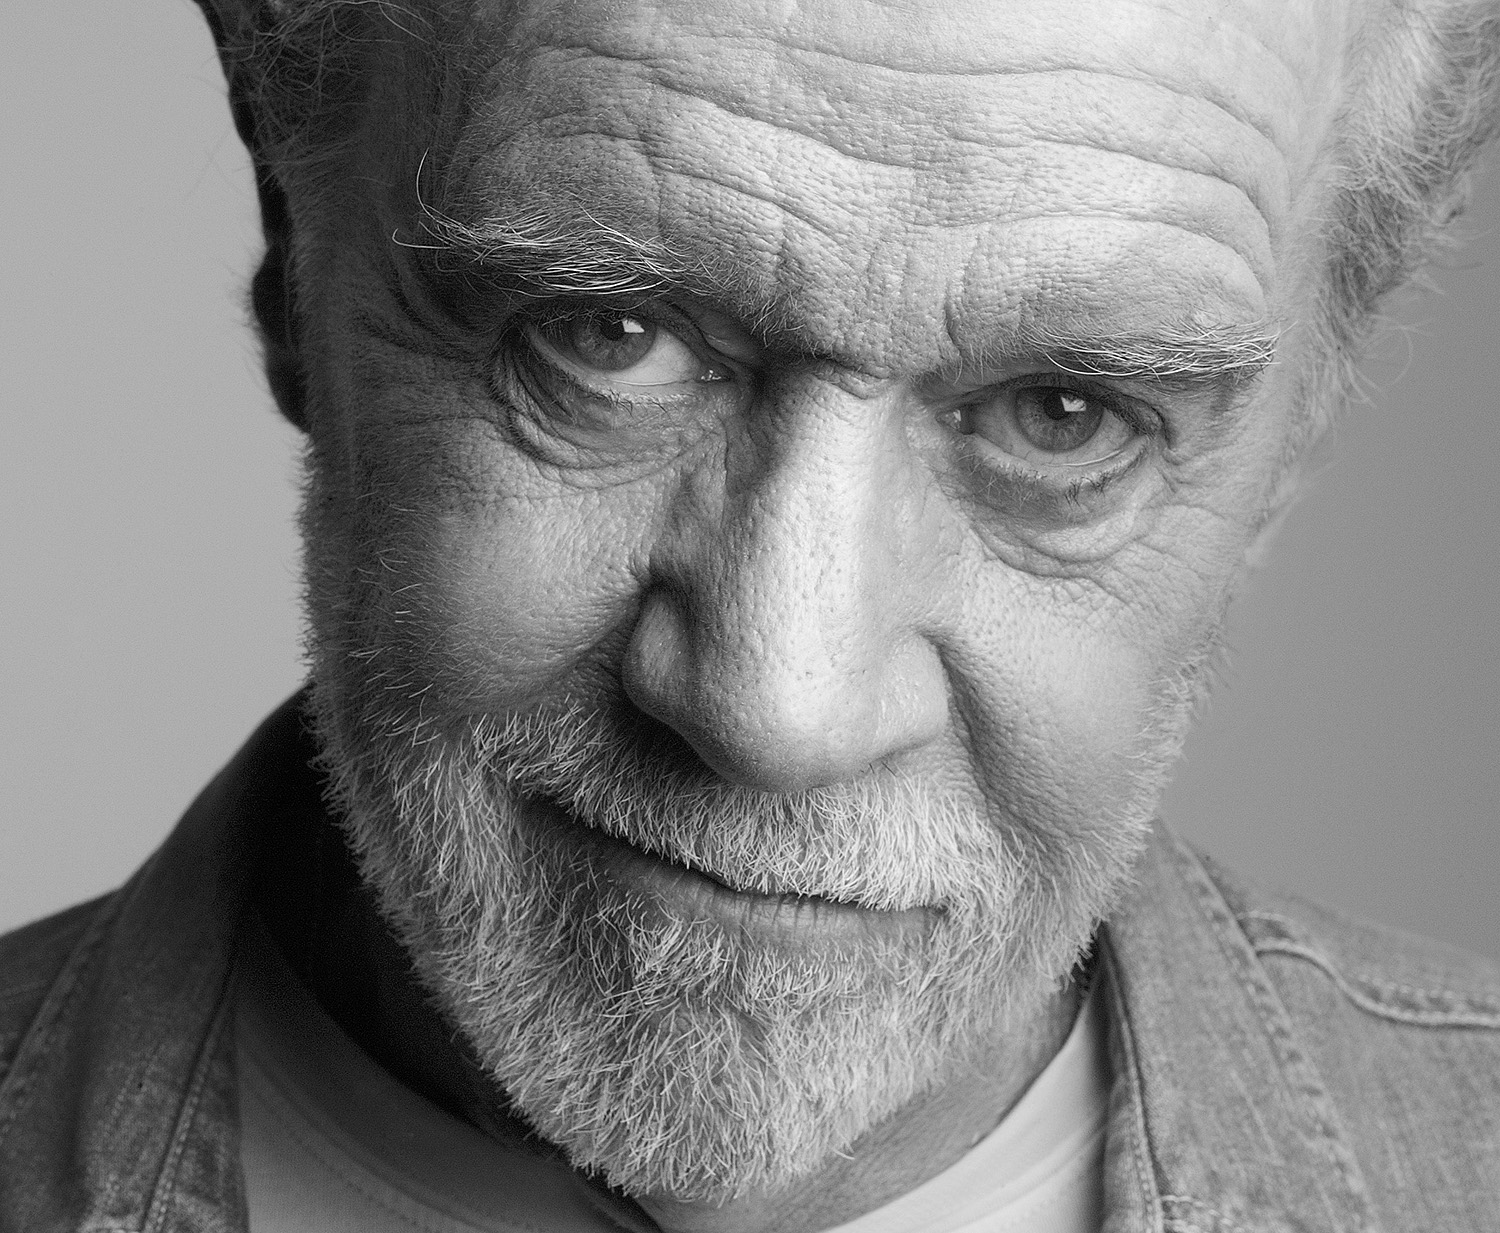 25 Quotes By George Carlin That Are Both Sarcastic And Philosophical